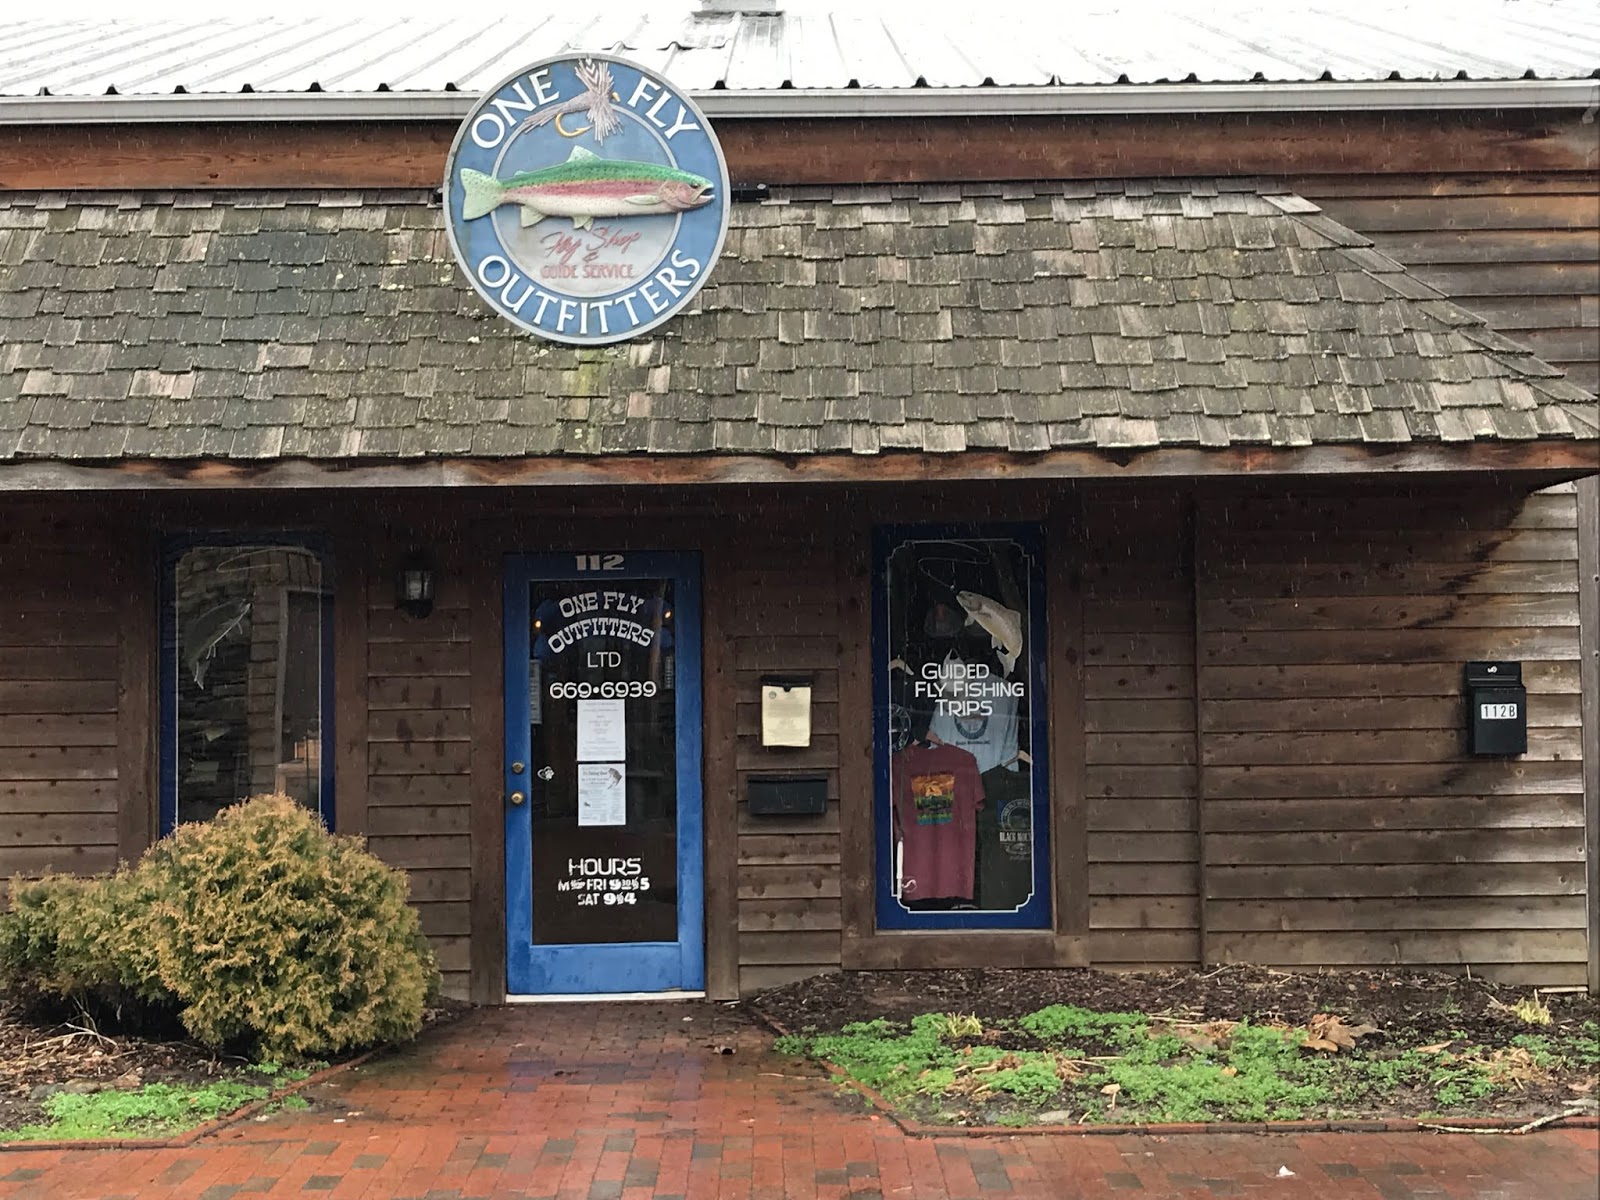 When I was 69 (now 80): Rainy day looking at shops in Black Mountain NC